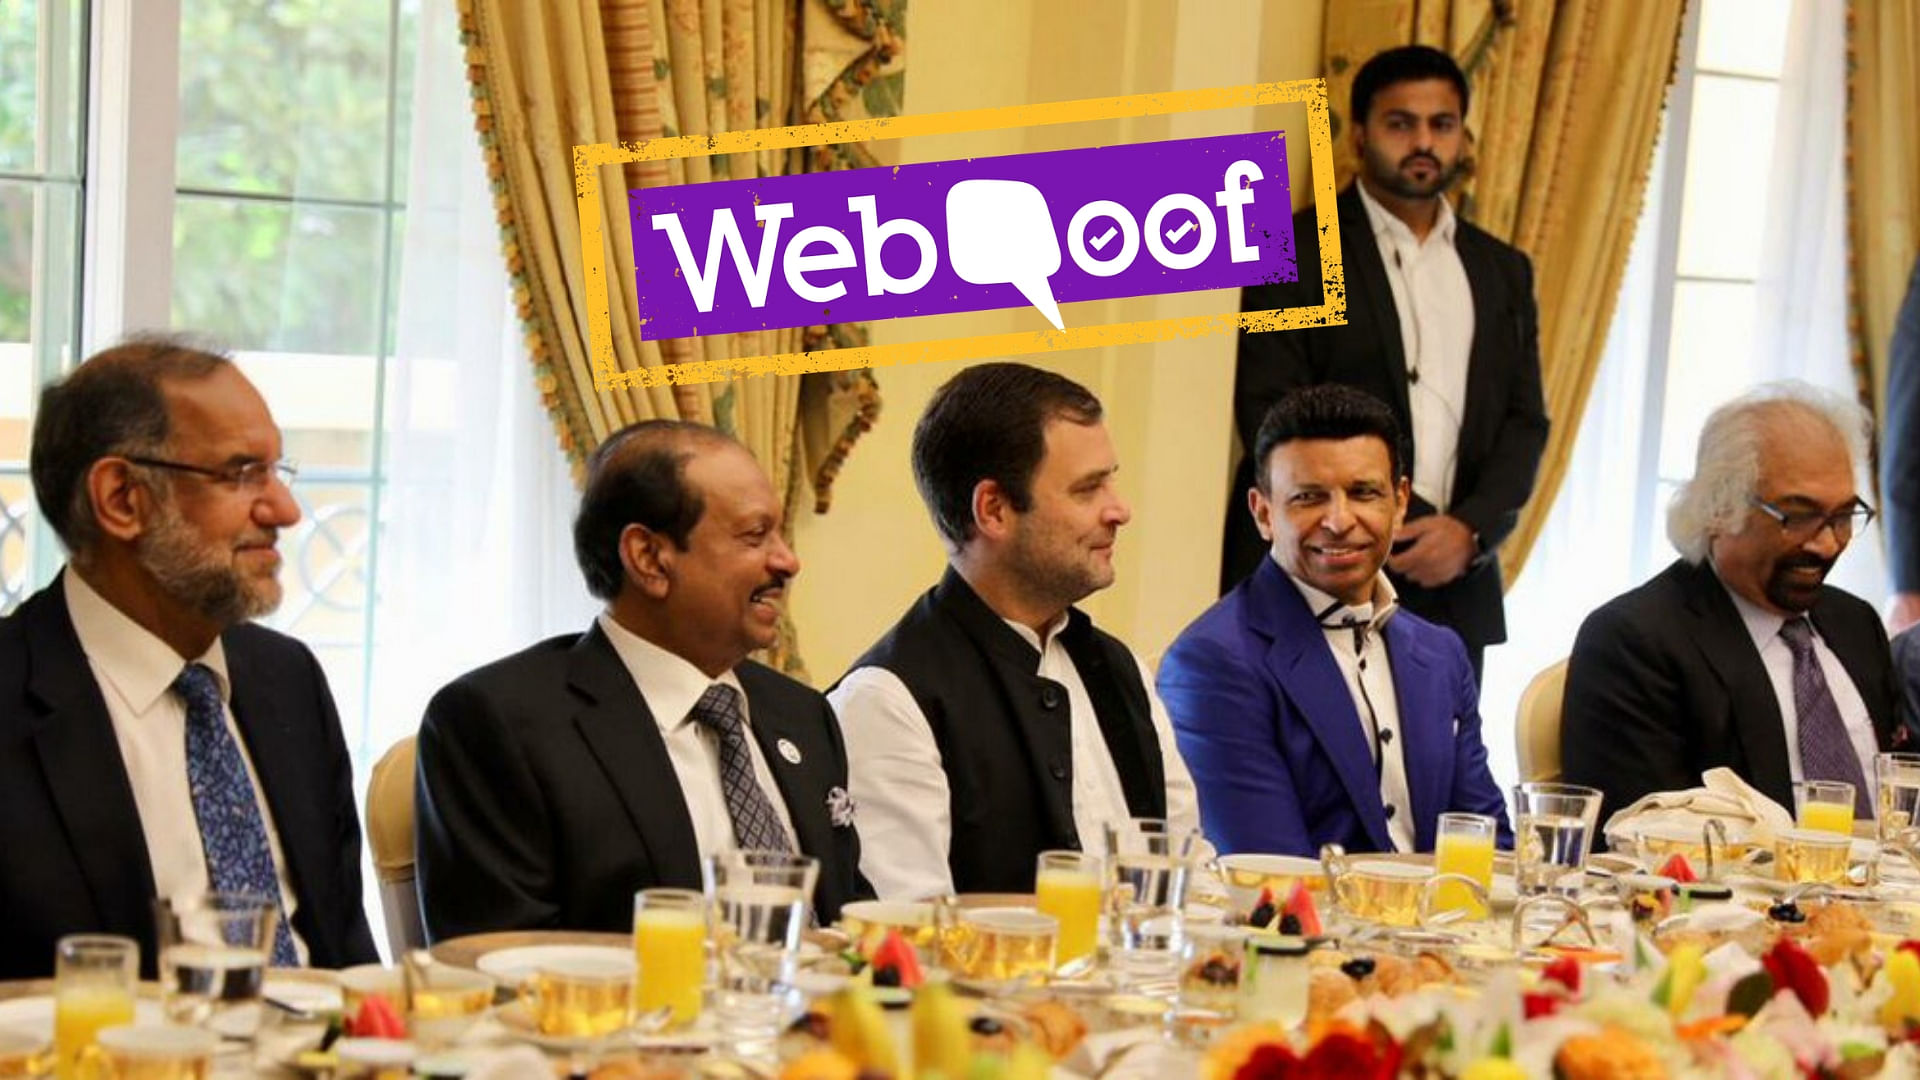 A post claiming Rahul Gandhi had a lavish £1,500 breakfast at a five-star hotel, where he also allegedly enjoyed beef, went viral on social media.